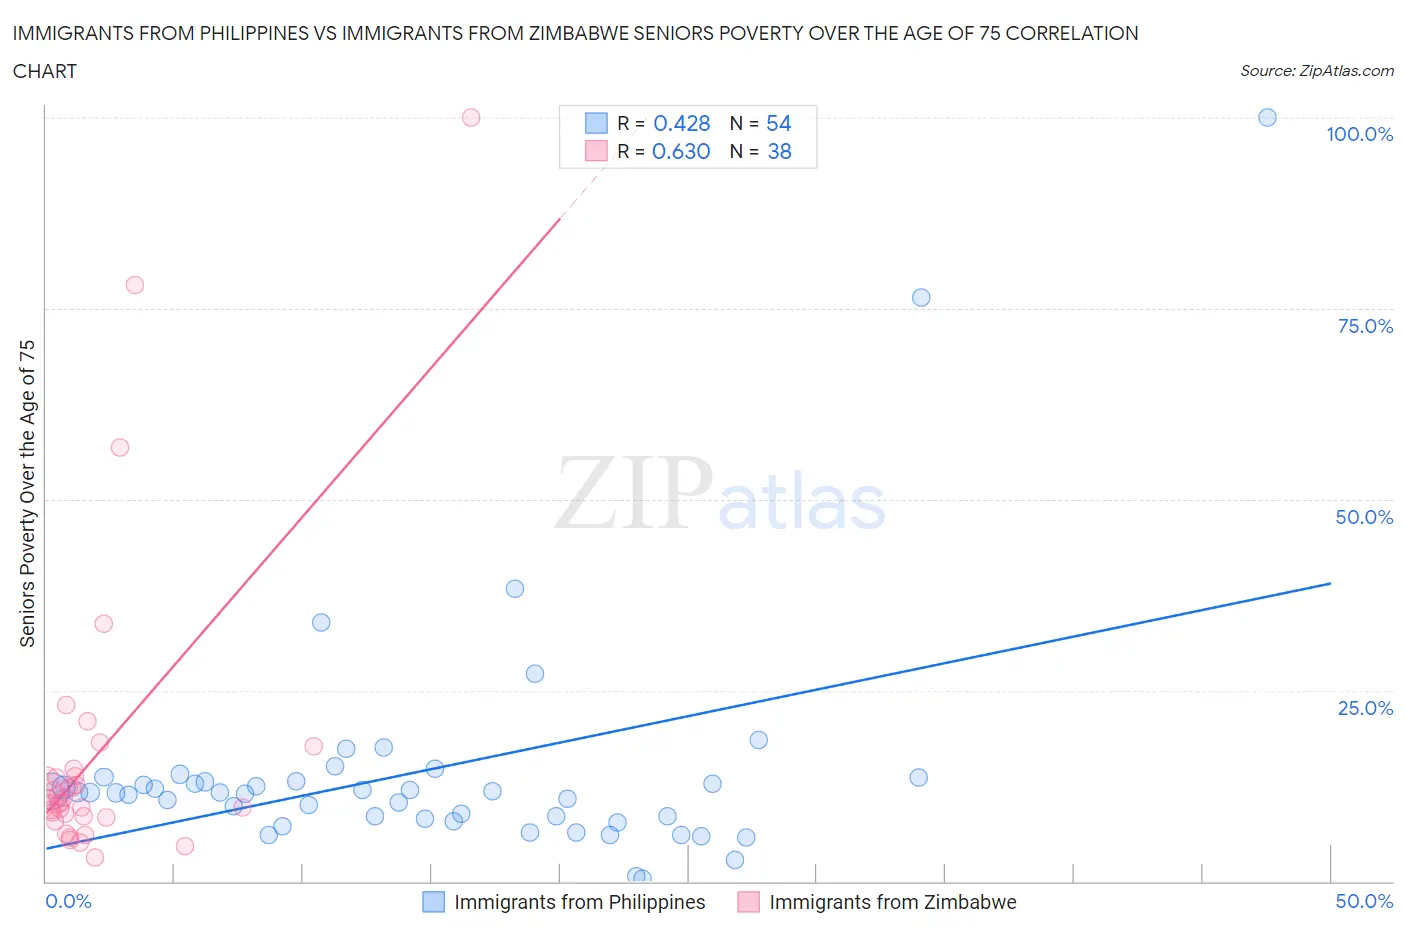 Immigrants from Philippines vs Immigrants from Zimbabwe Seniors Poverty Over the Age of 75